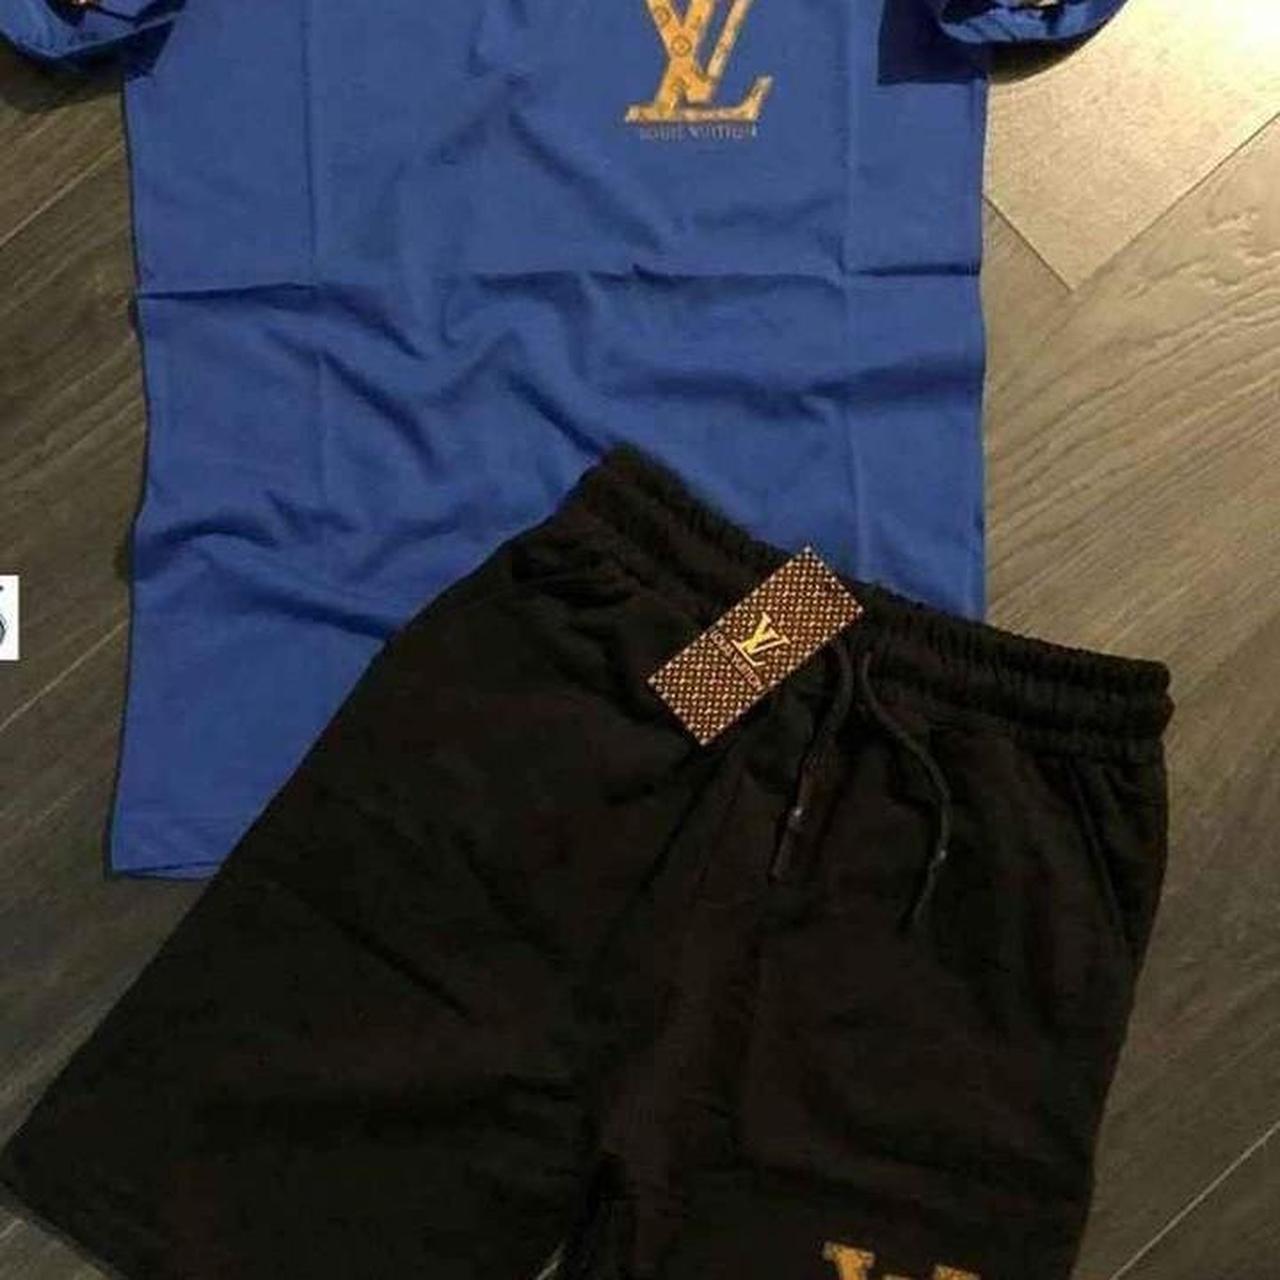 Louis Vuitton shirt and shorts set. In sizes small